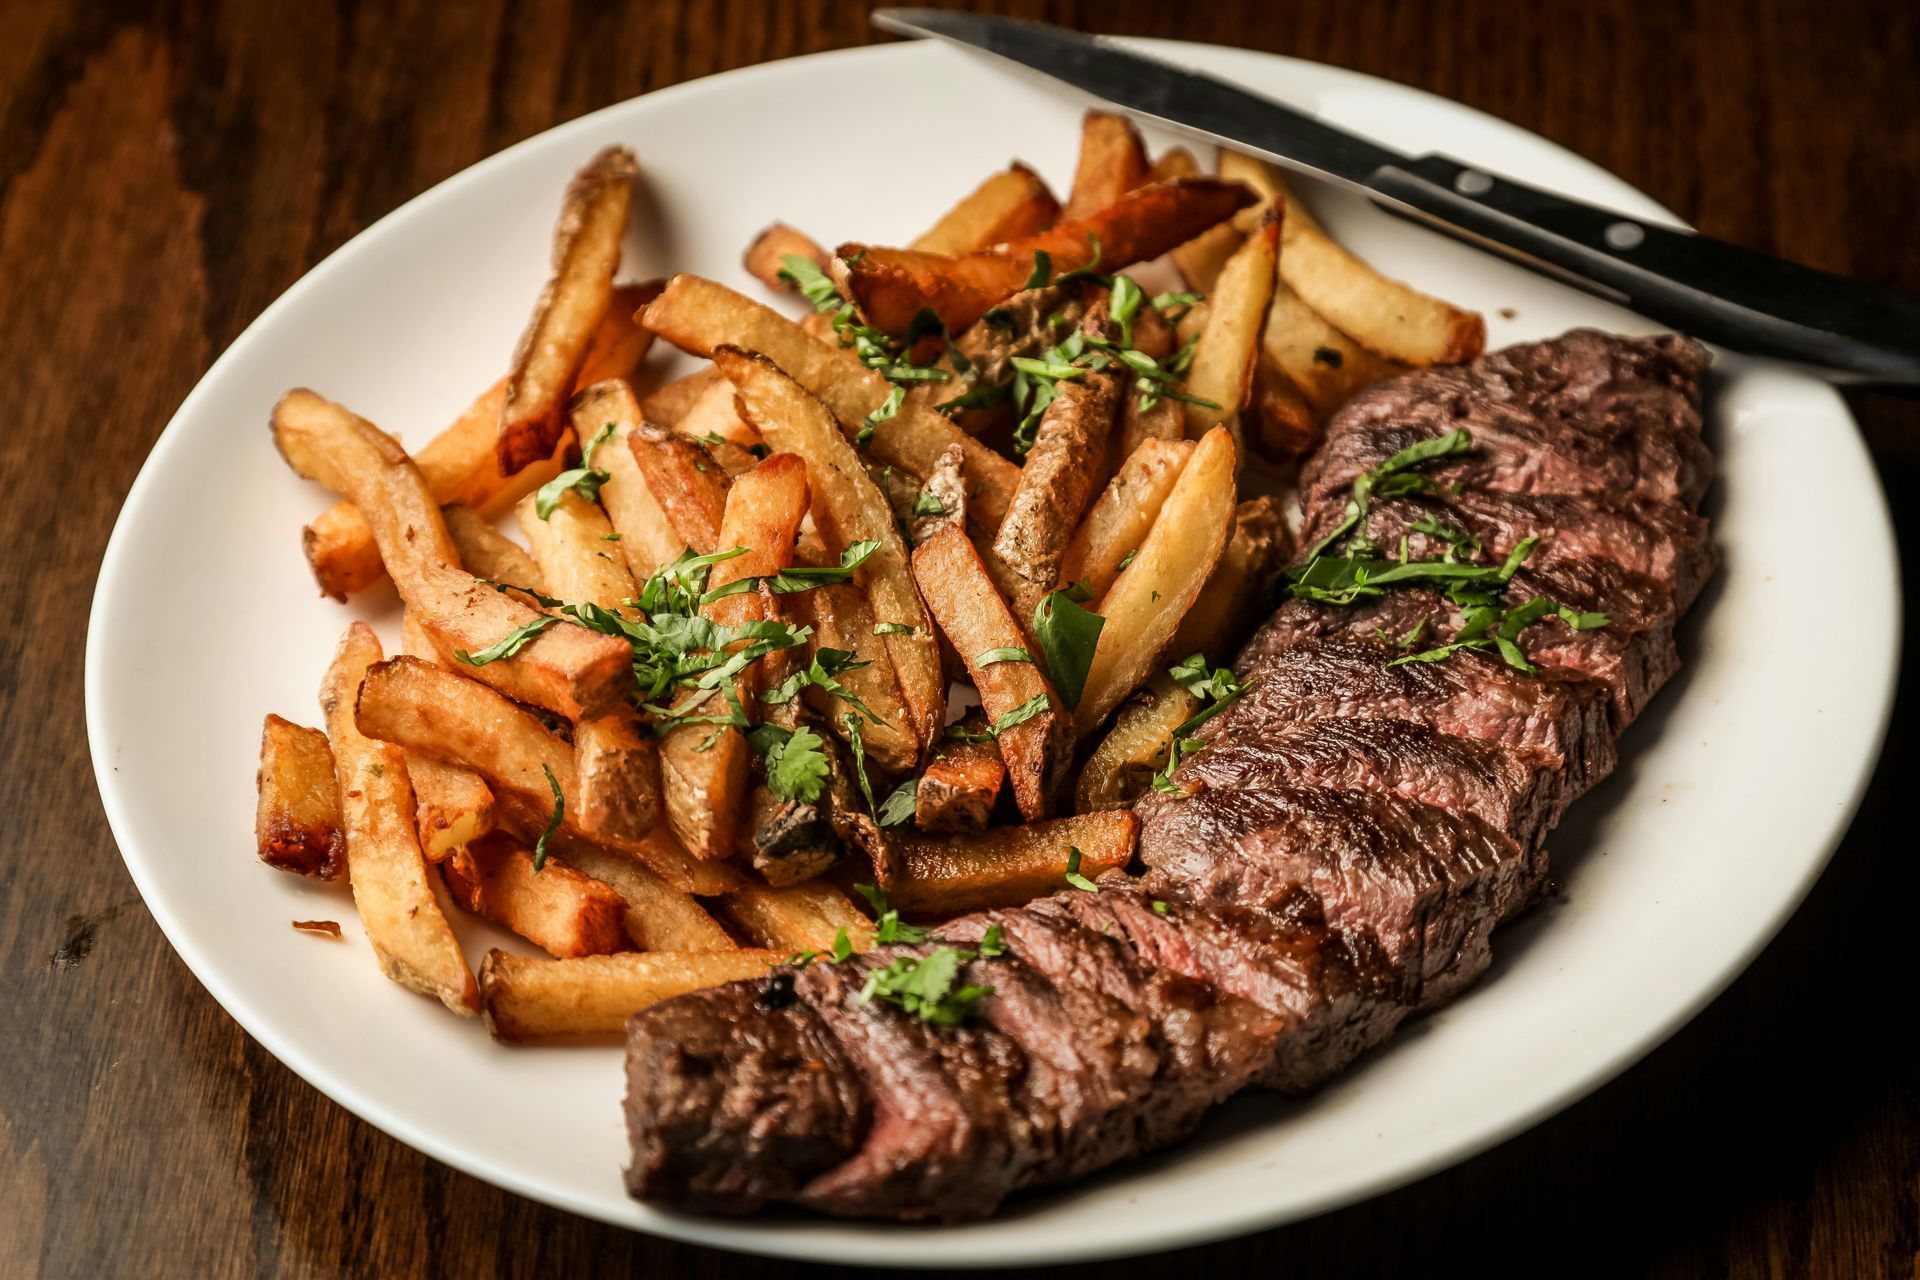 Grilled New York Strip Steak served with crispy chips and parsley garnishing